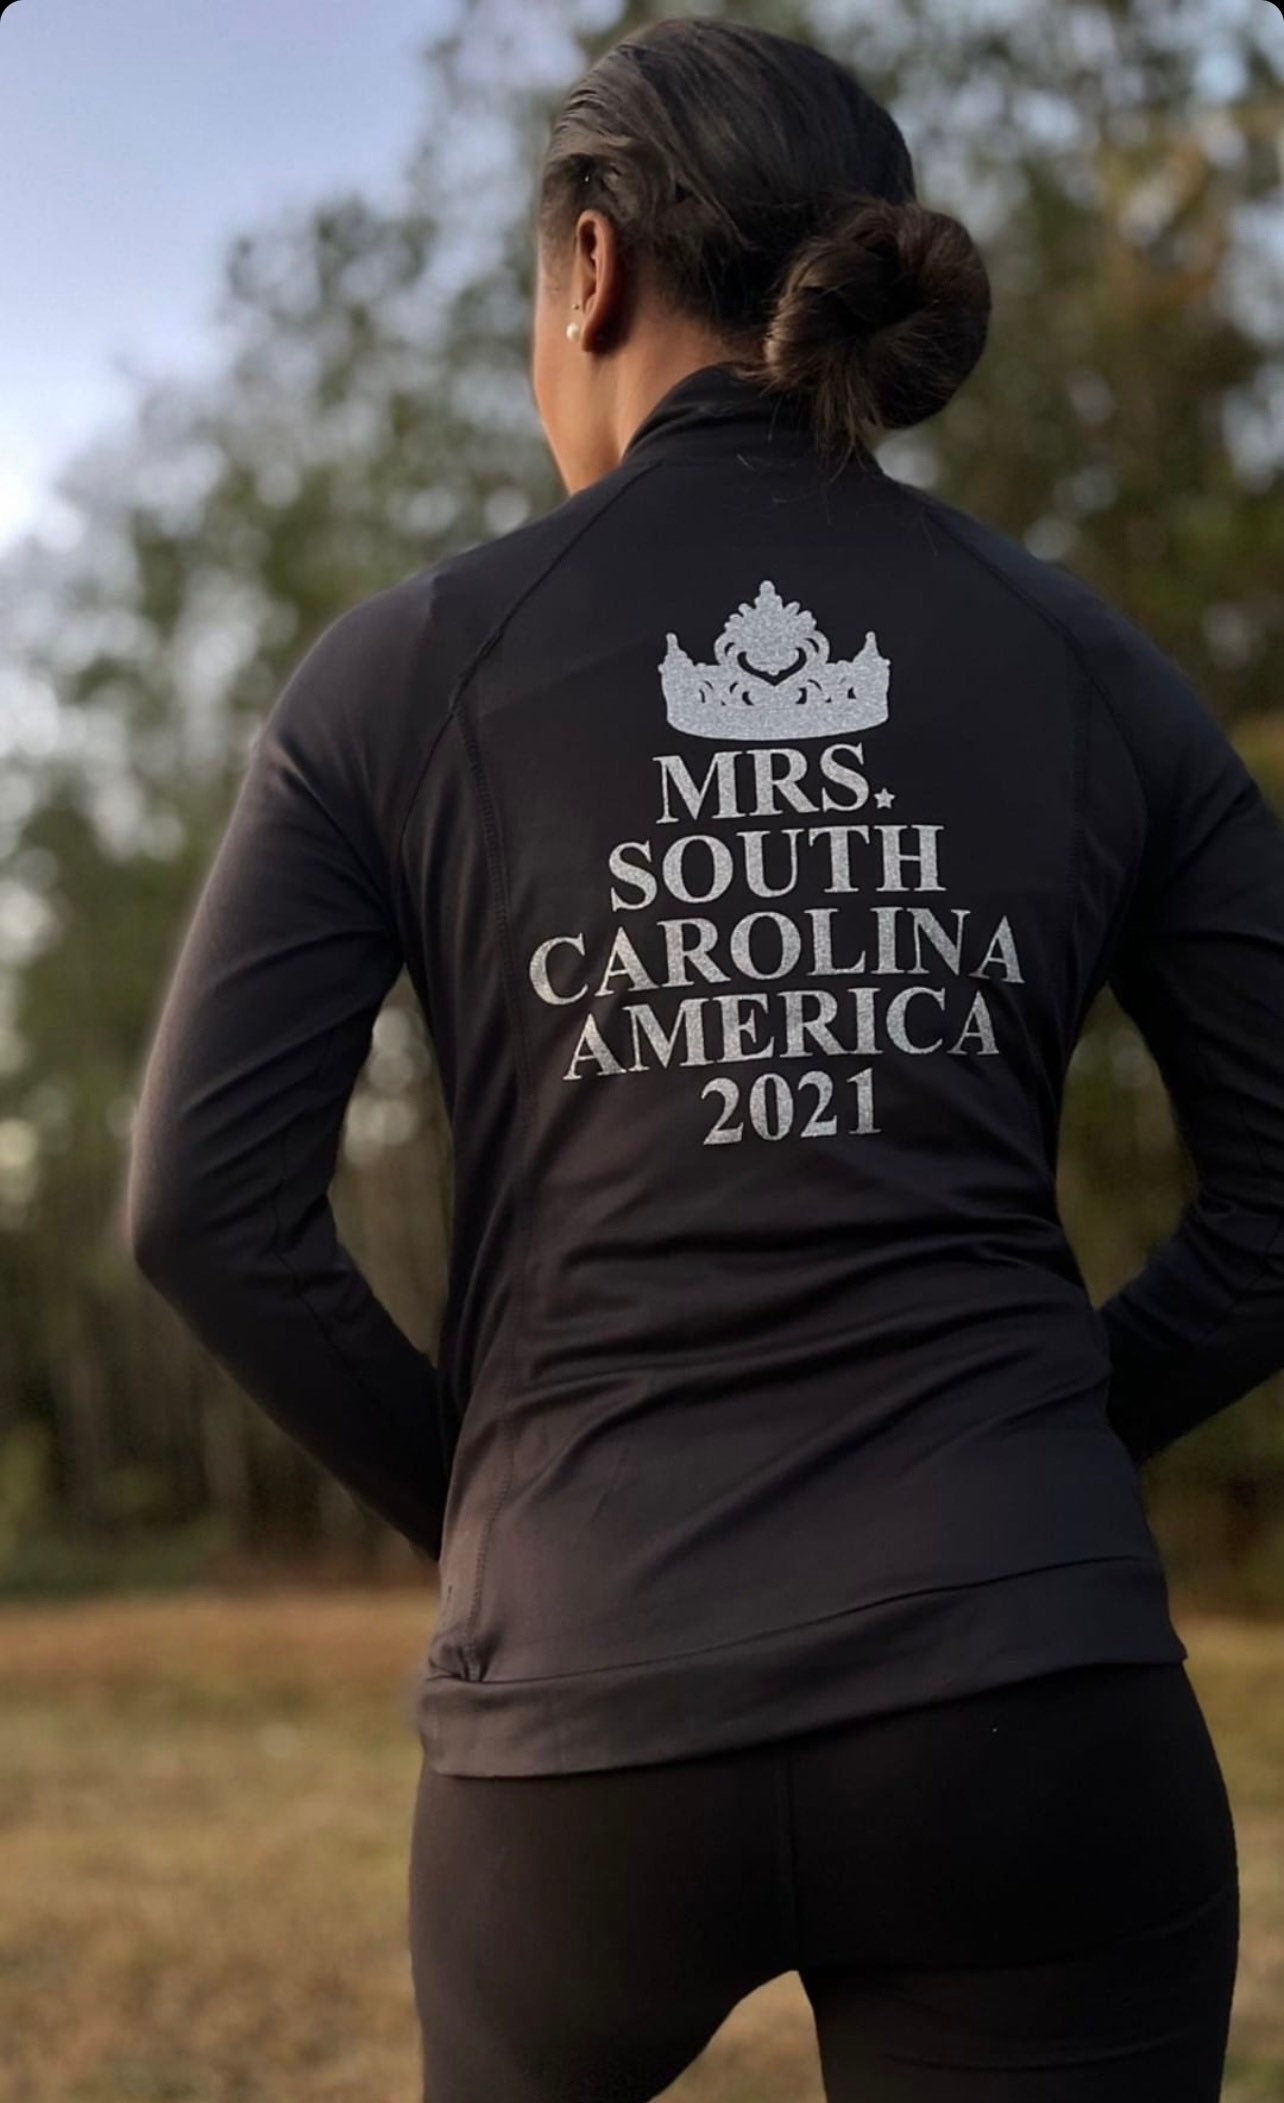 Mrs. World/Mrs. America/Miss for America Title Jackets